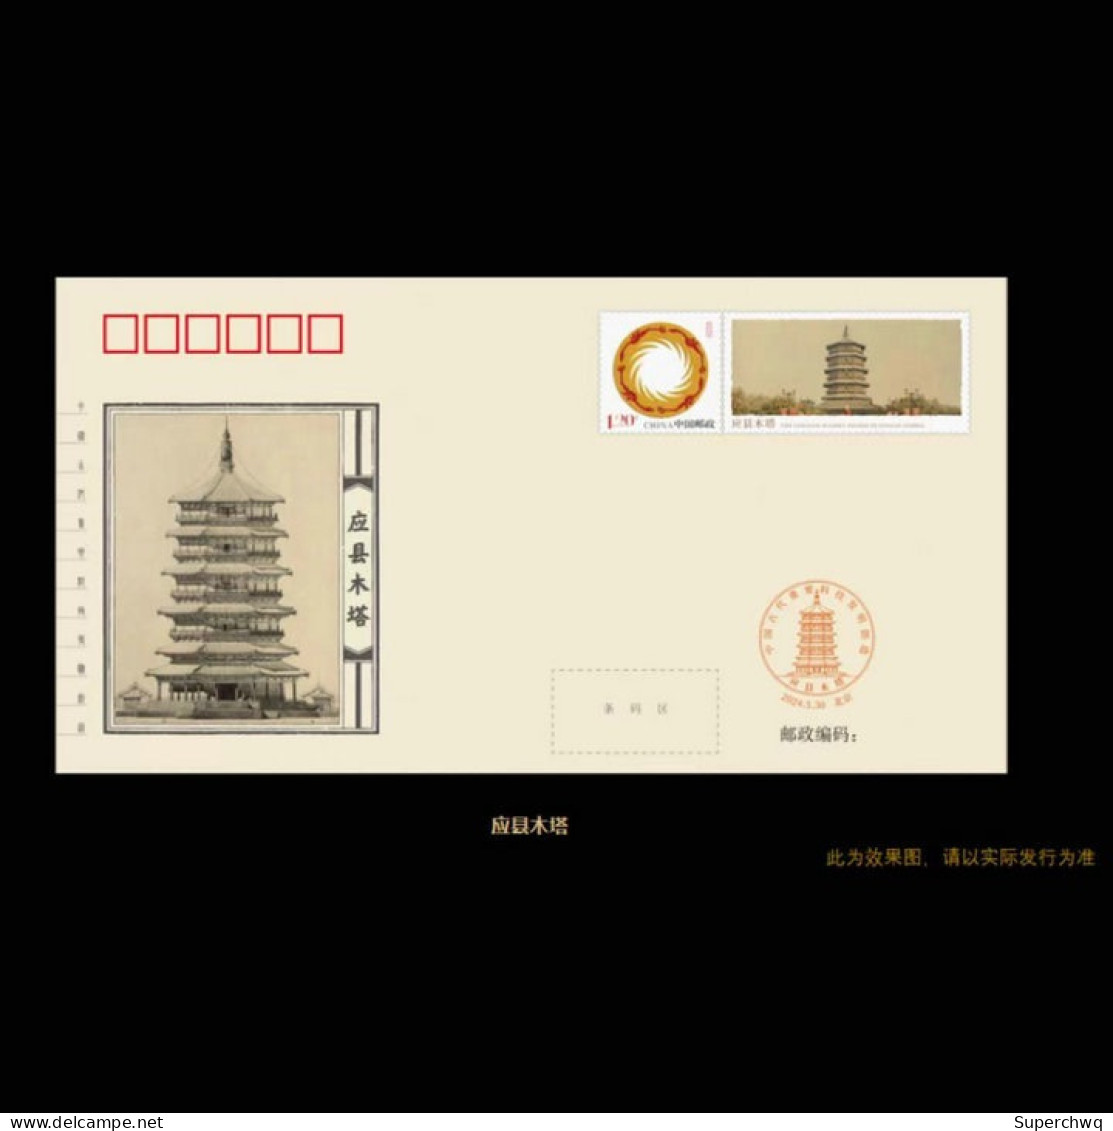 China Cover The Commemorative Cover Of "Qiaosi Tiangong - Important Scientific And Technological Inventions And Creation - Brieven En Documenten